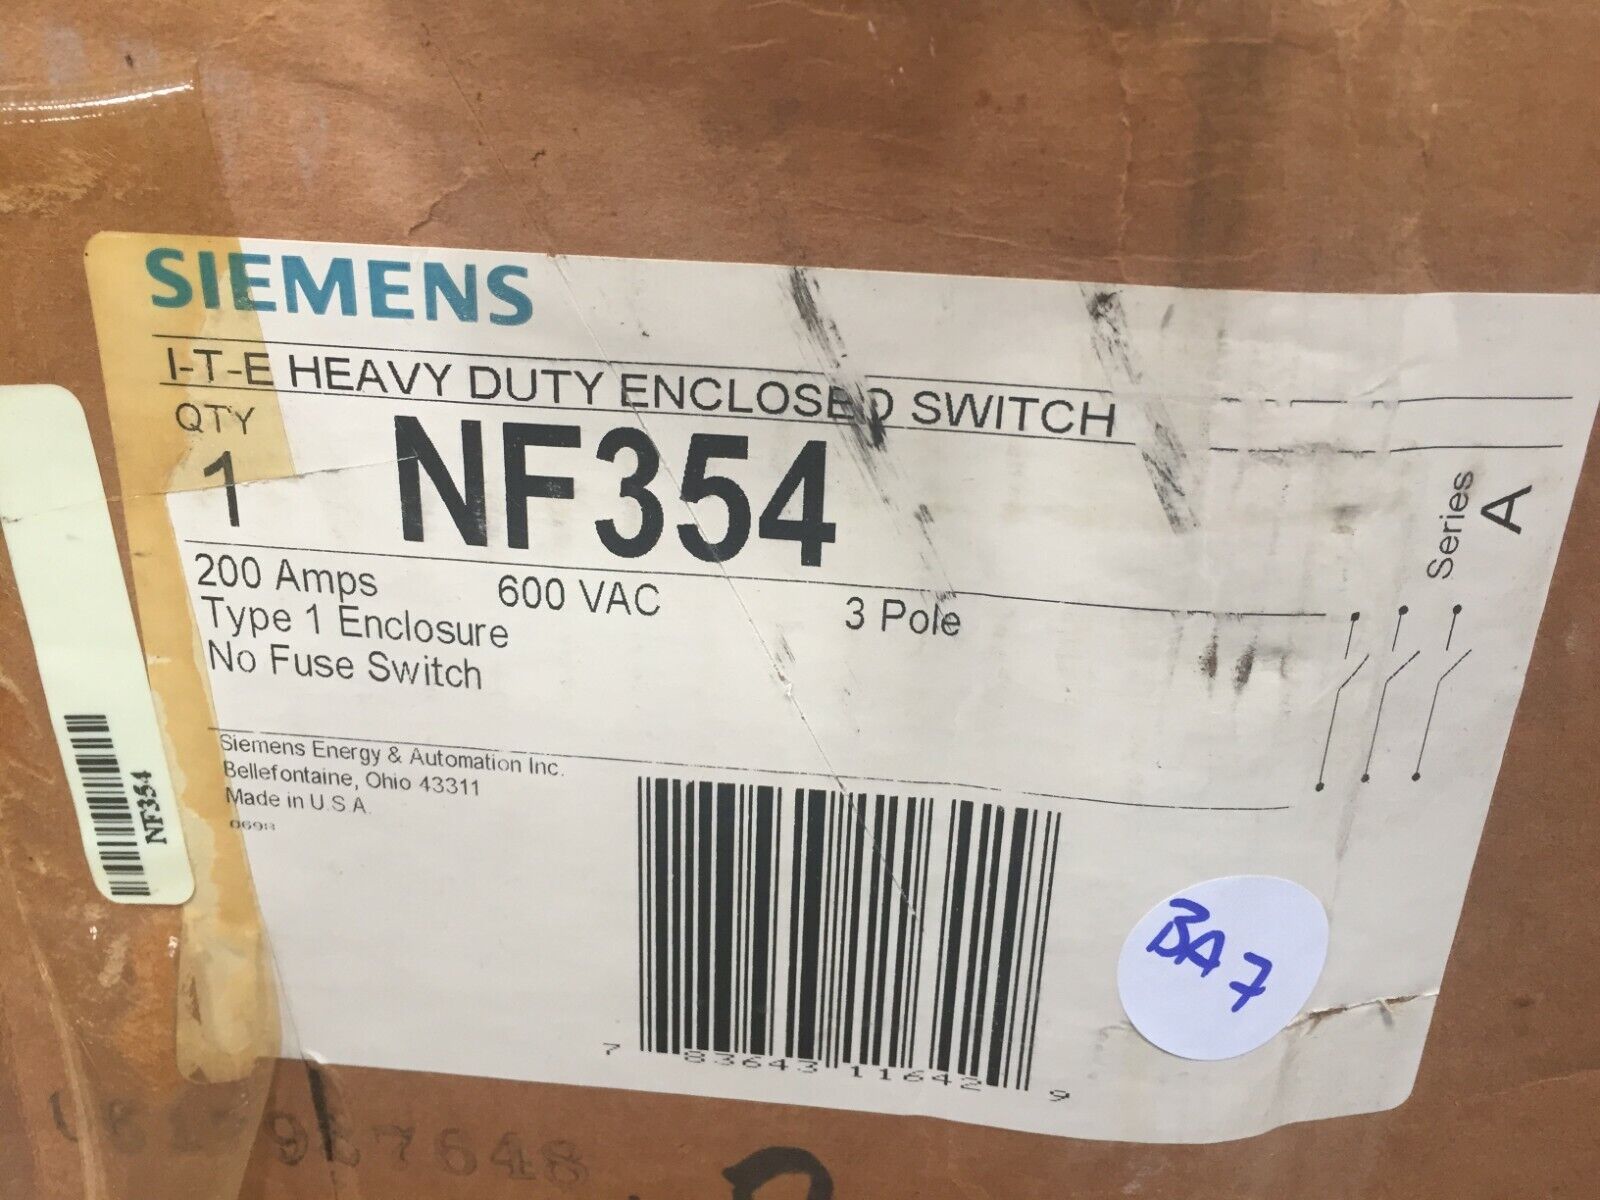 Siemens I-T-E Heavy Duty Enclosed Switch NF354 200 Amps 600 VAC 3 Pole 